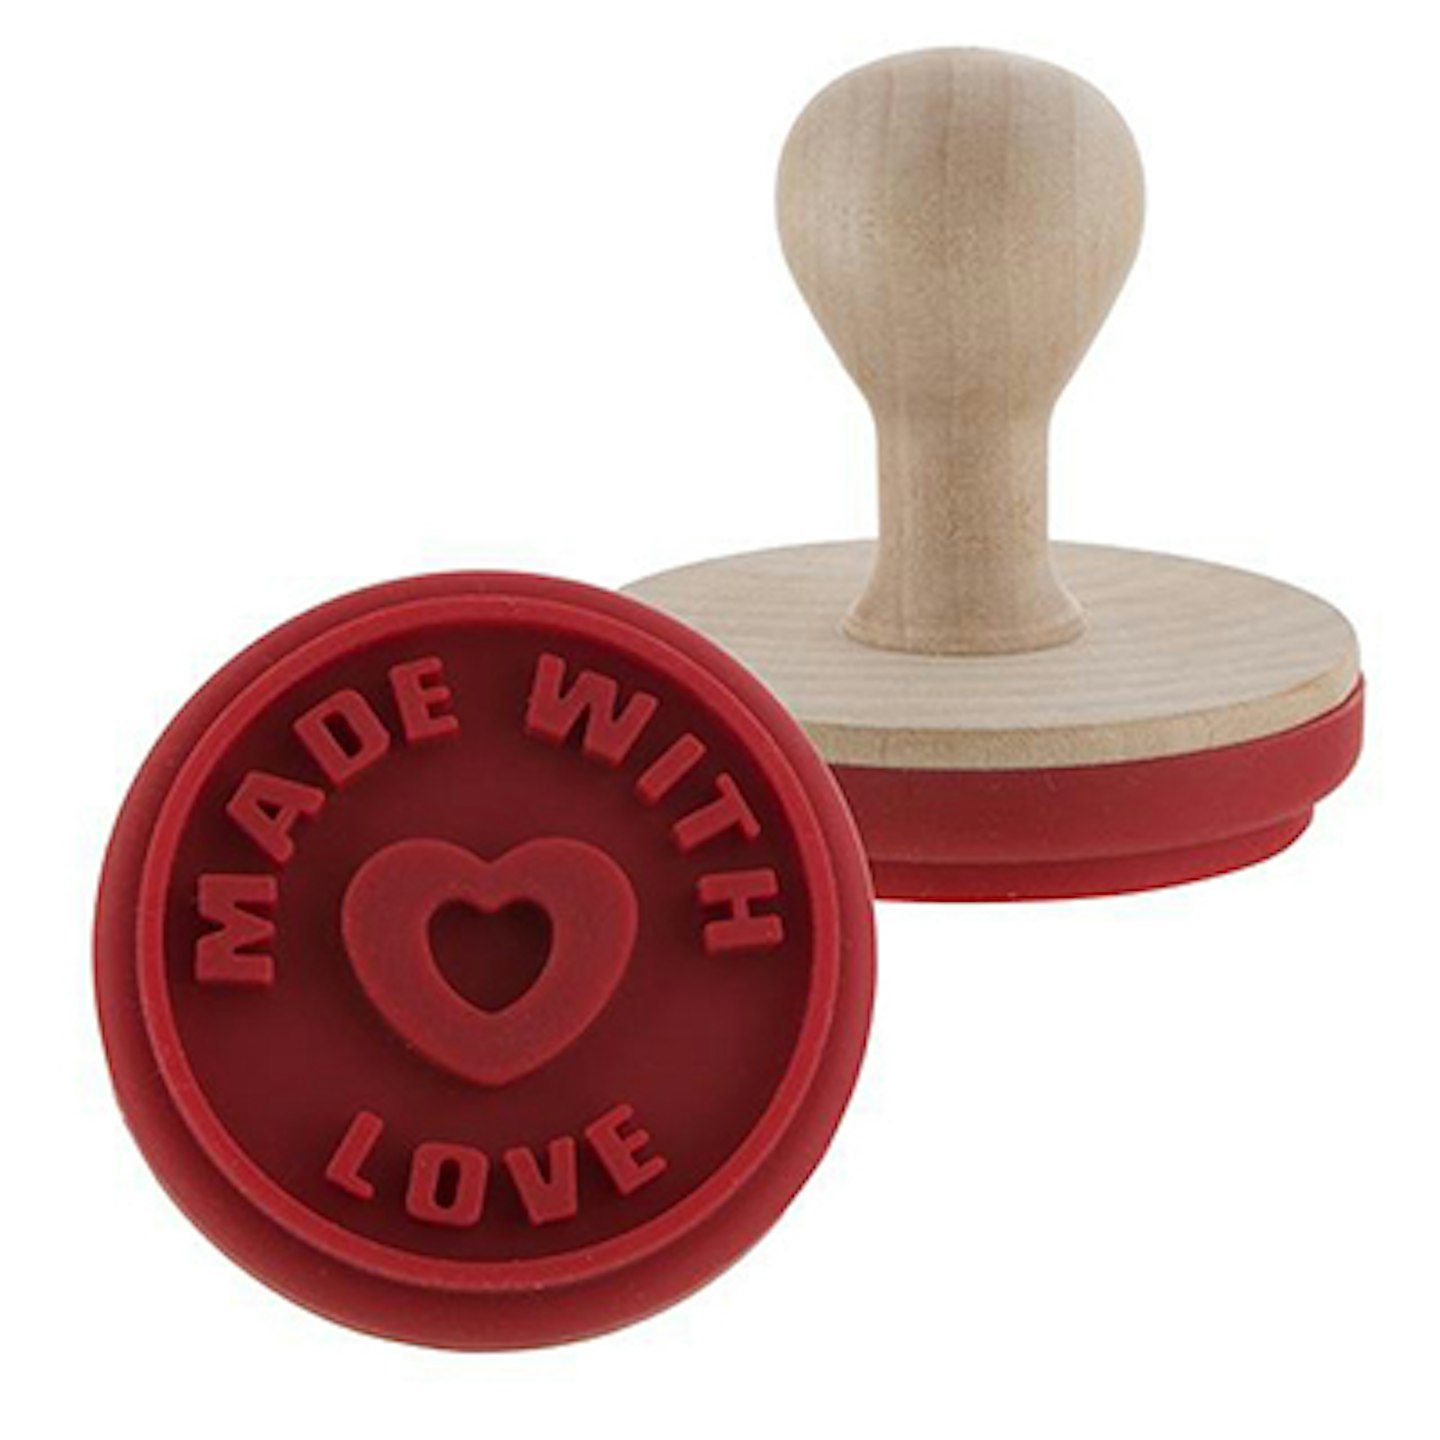 Made with love cookie stamp